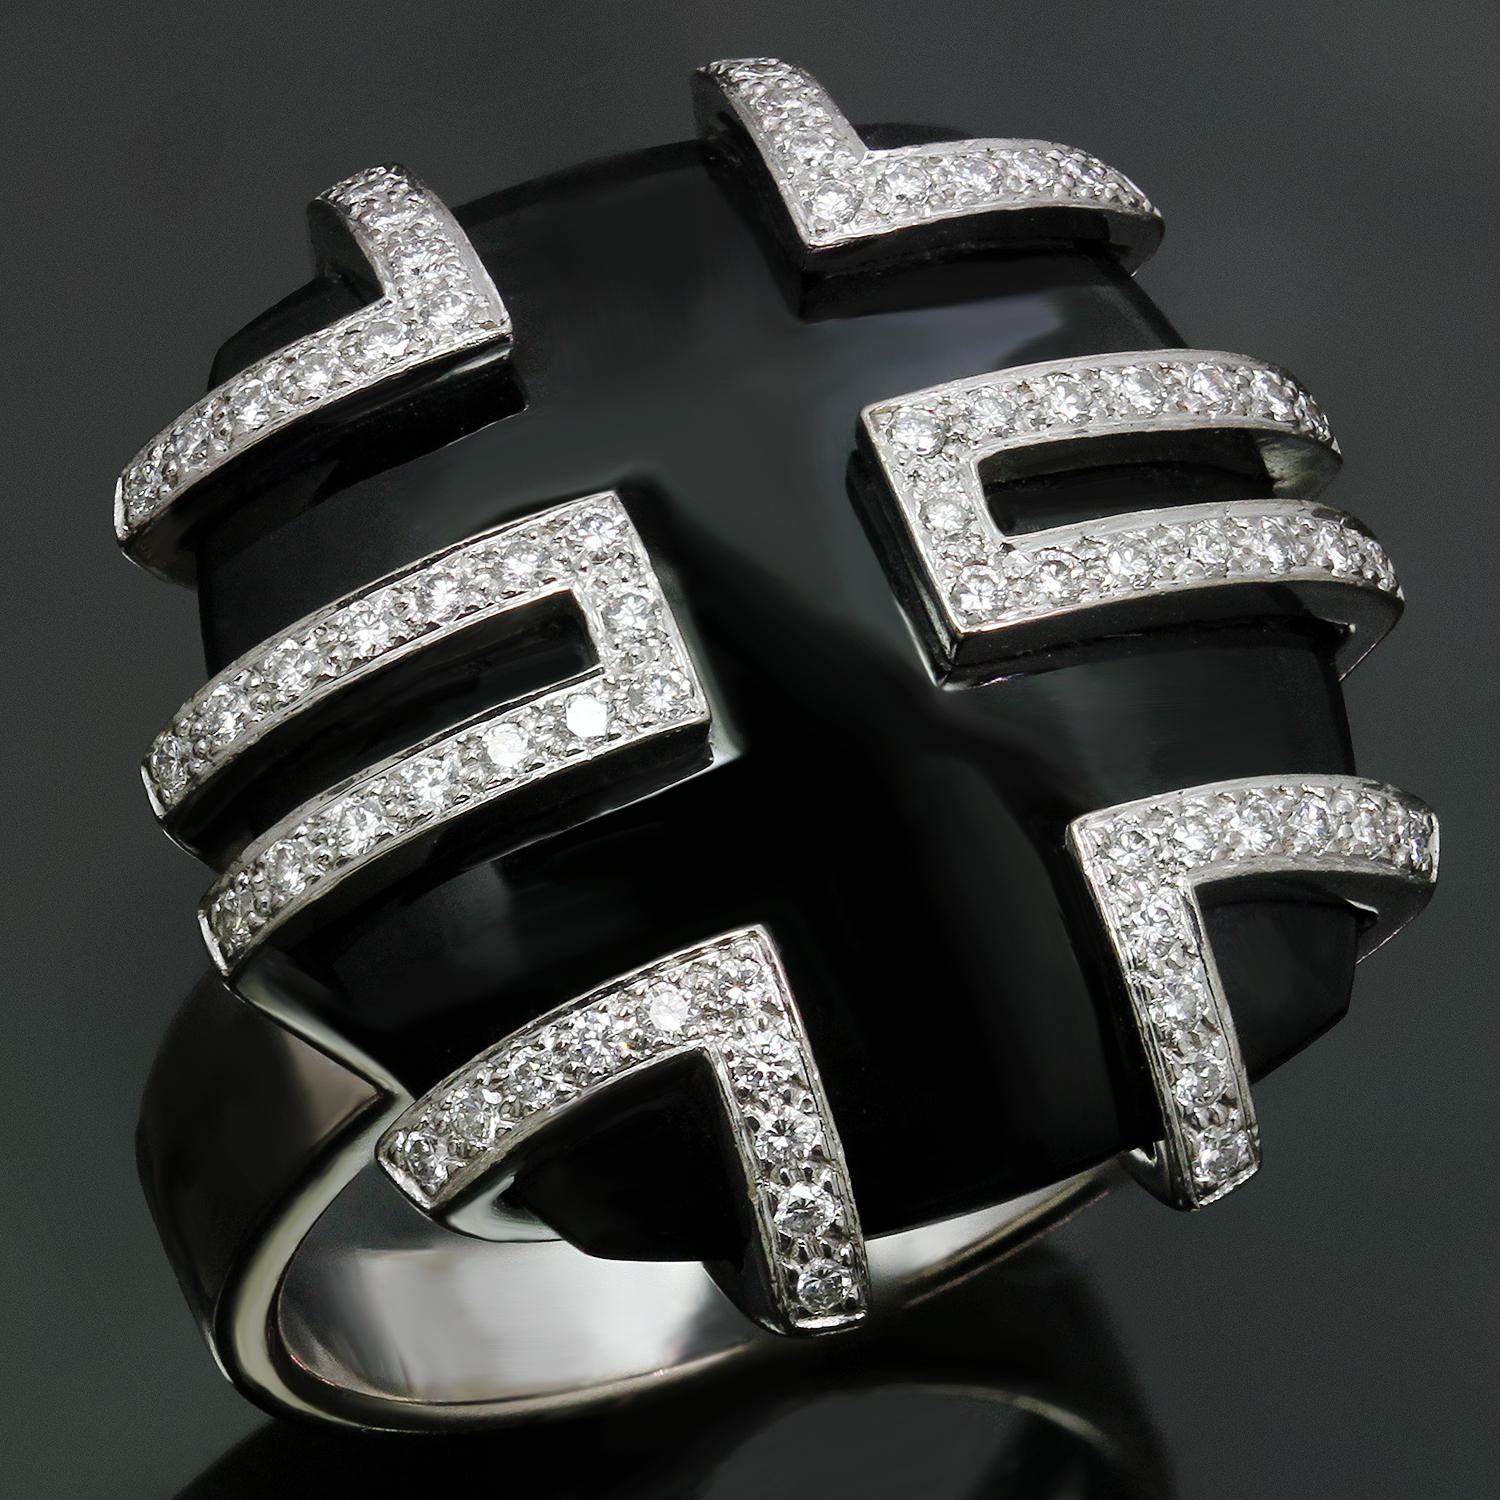 This spectacular ring from Cartier's iconic Le Baiser du Dragon is inspired by gorgeous East Asian design elements, crafted in 18k white gold, set with a cushion-cut black jade and accented with round brilliant E-F-G VVS1-VVS2 diamonds. Made in